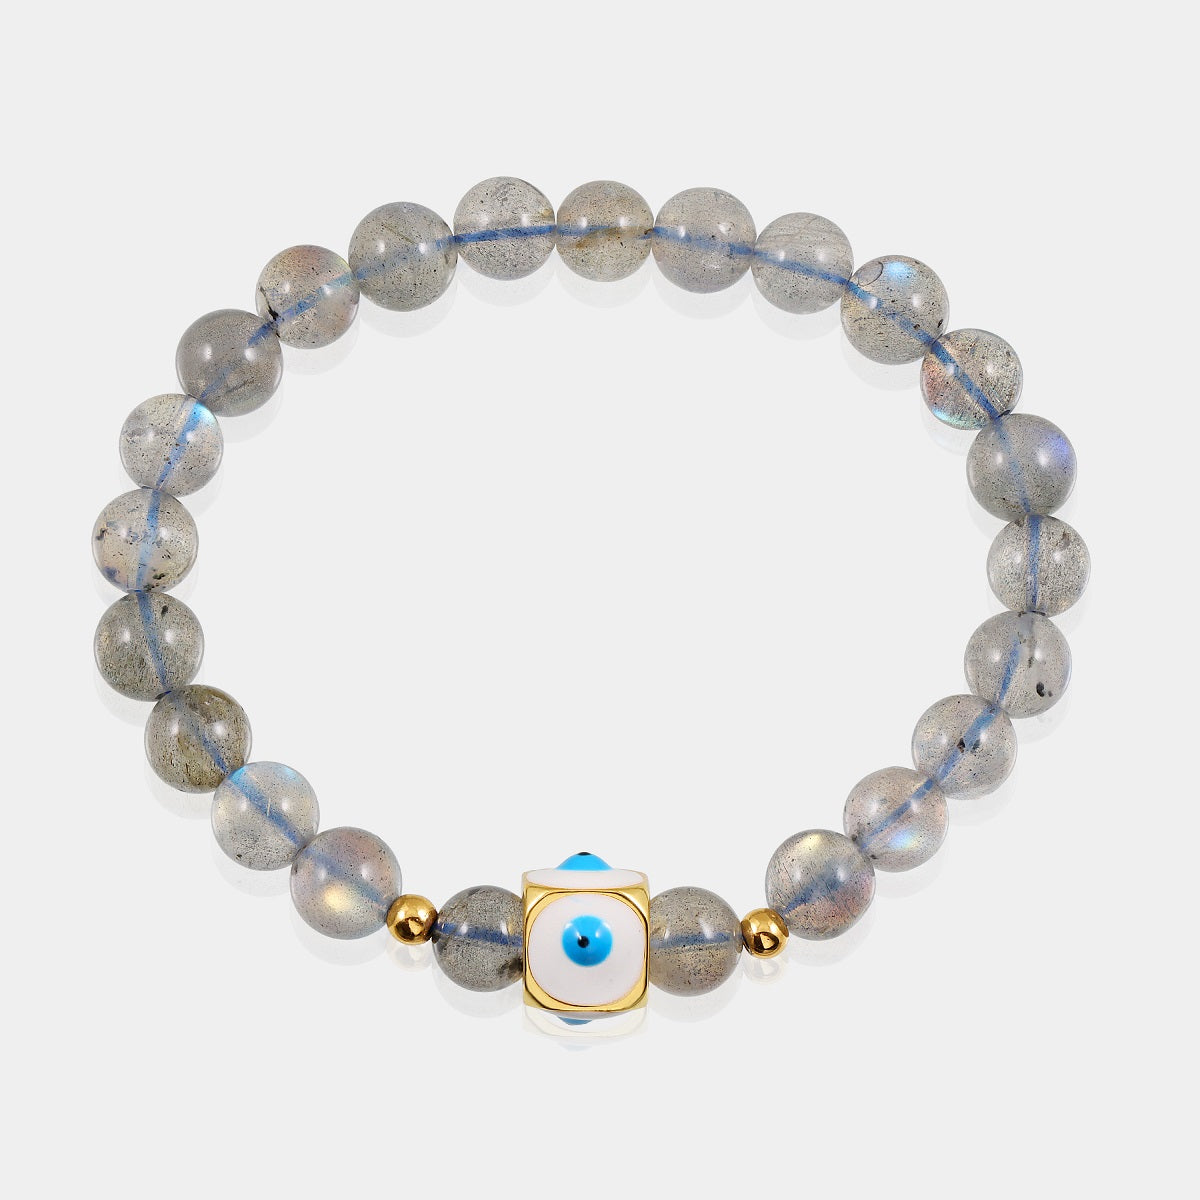 Detailed view of Evil Eye beads, featuring a protective symbol against negative energies.